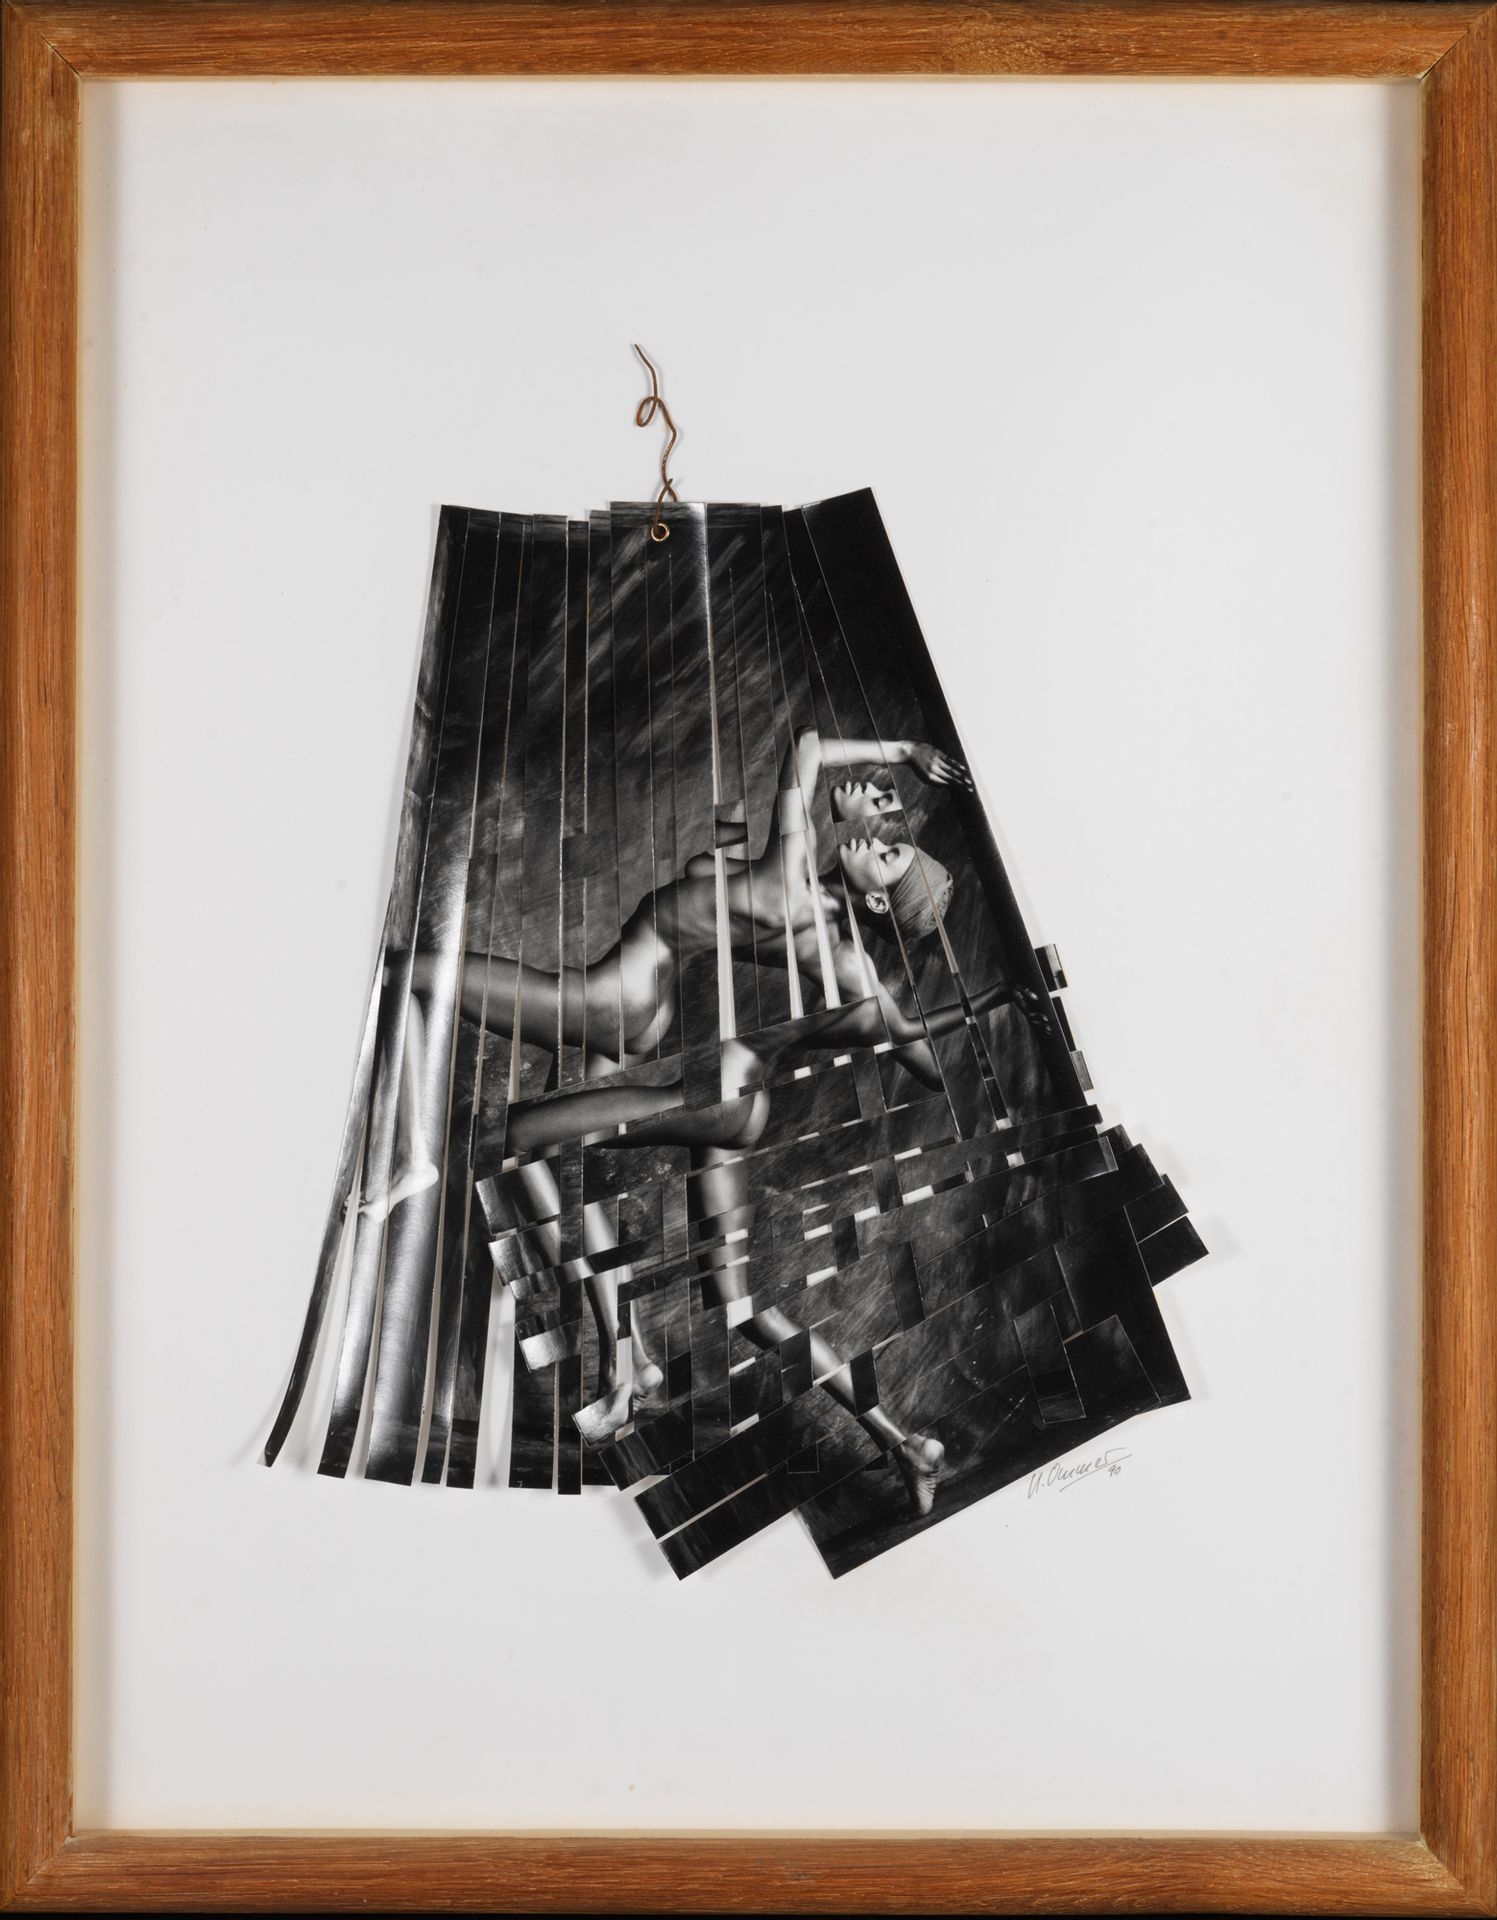 Artwork by Uwe Ommer, Untitled, Made of Photographic prints cut and assembled, metal (eyelet) and string affixed to paper